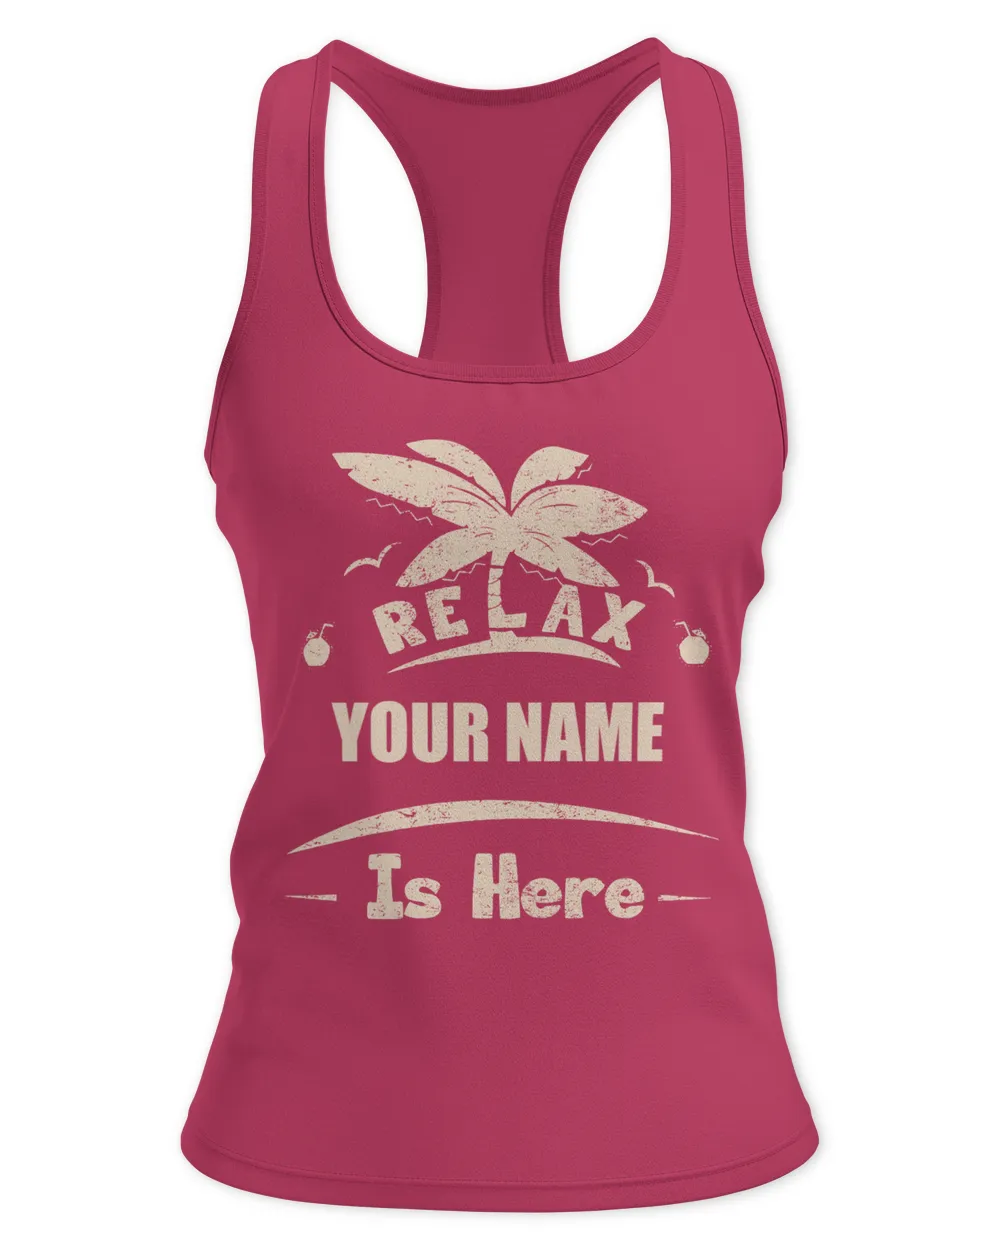 [Personalize] Relax is here